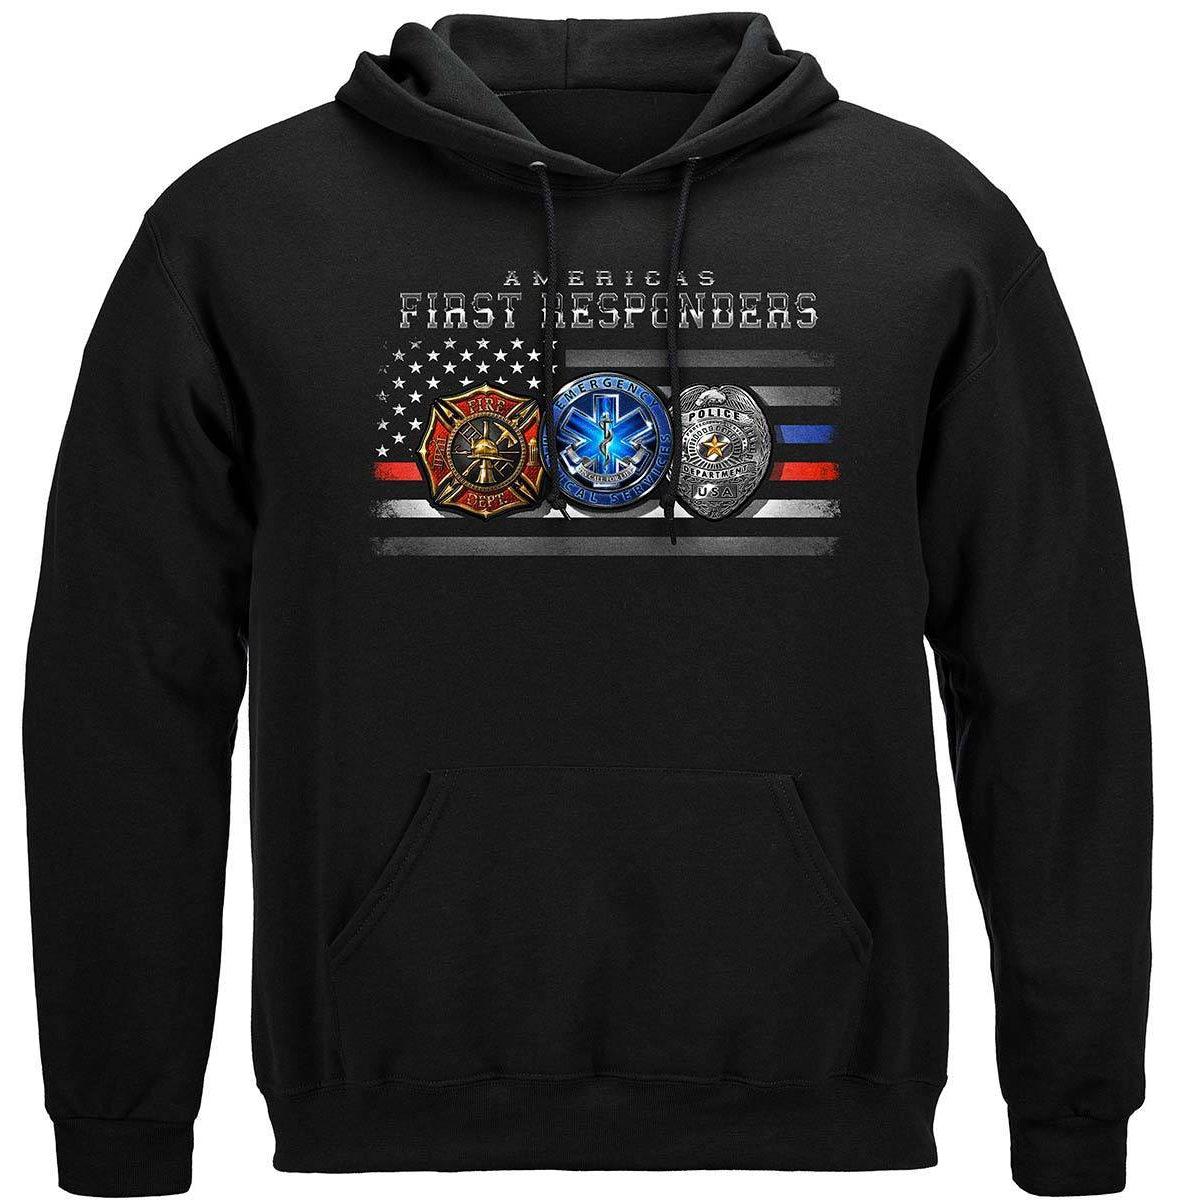 First Responders Flag Home Town Heroes T-Shirt - Military Republic